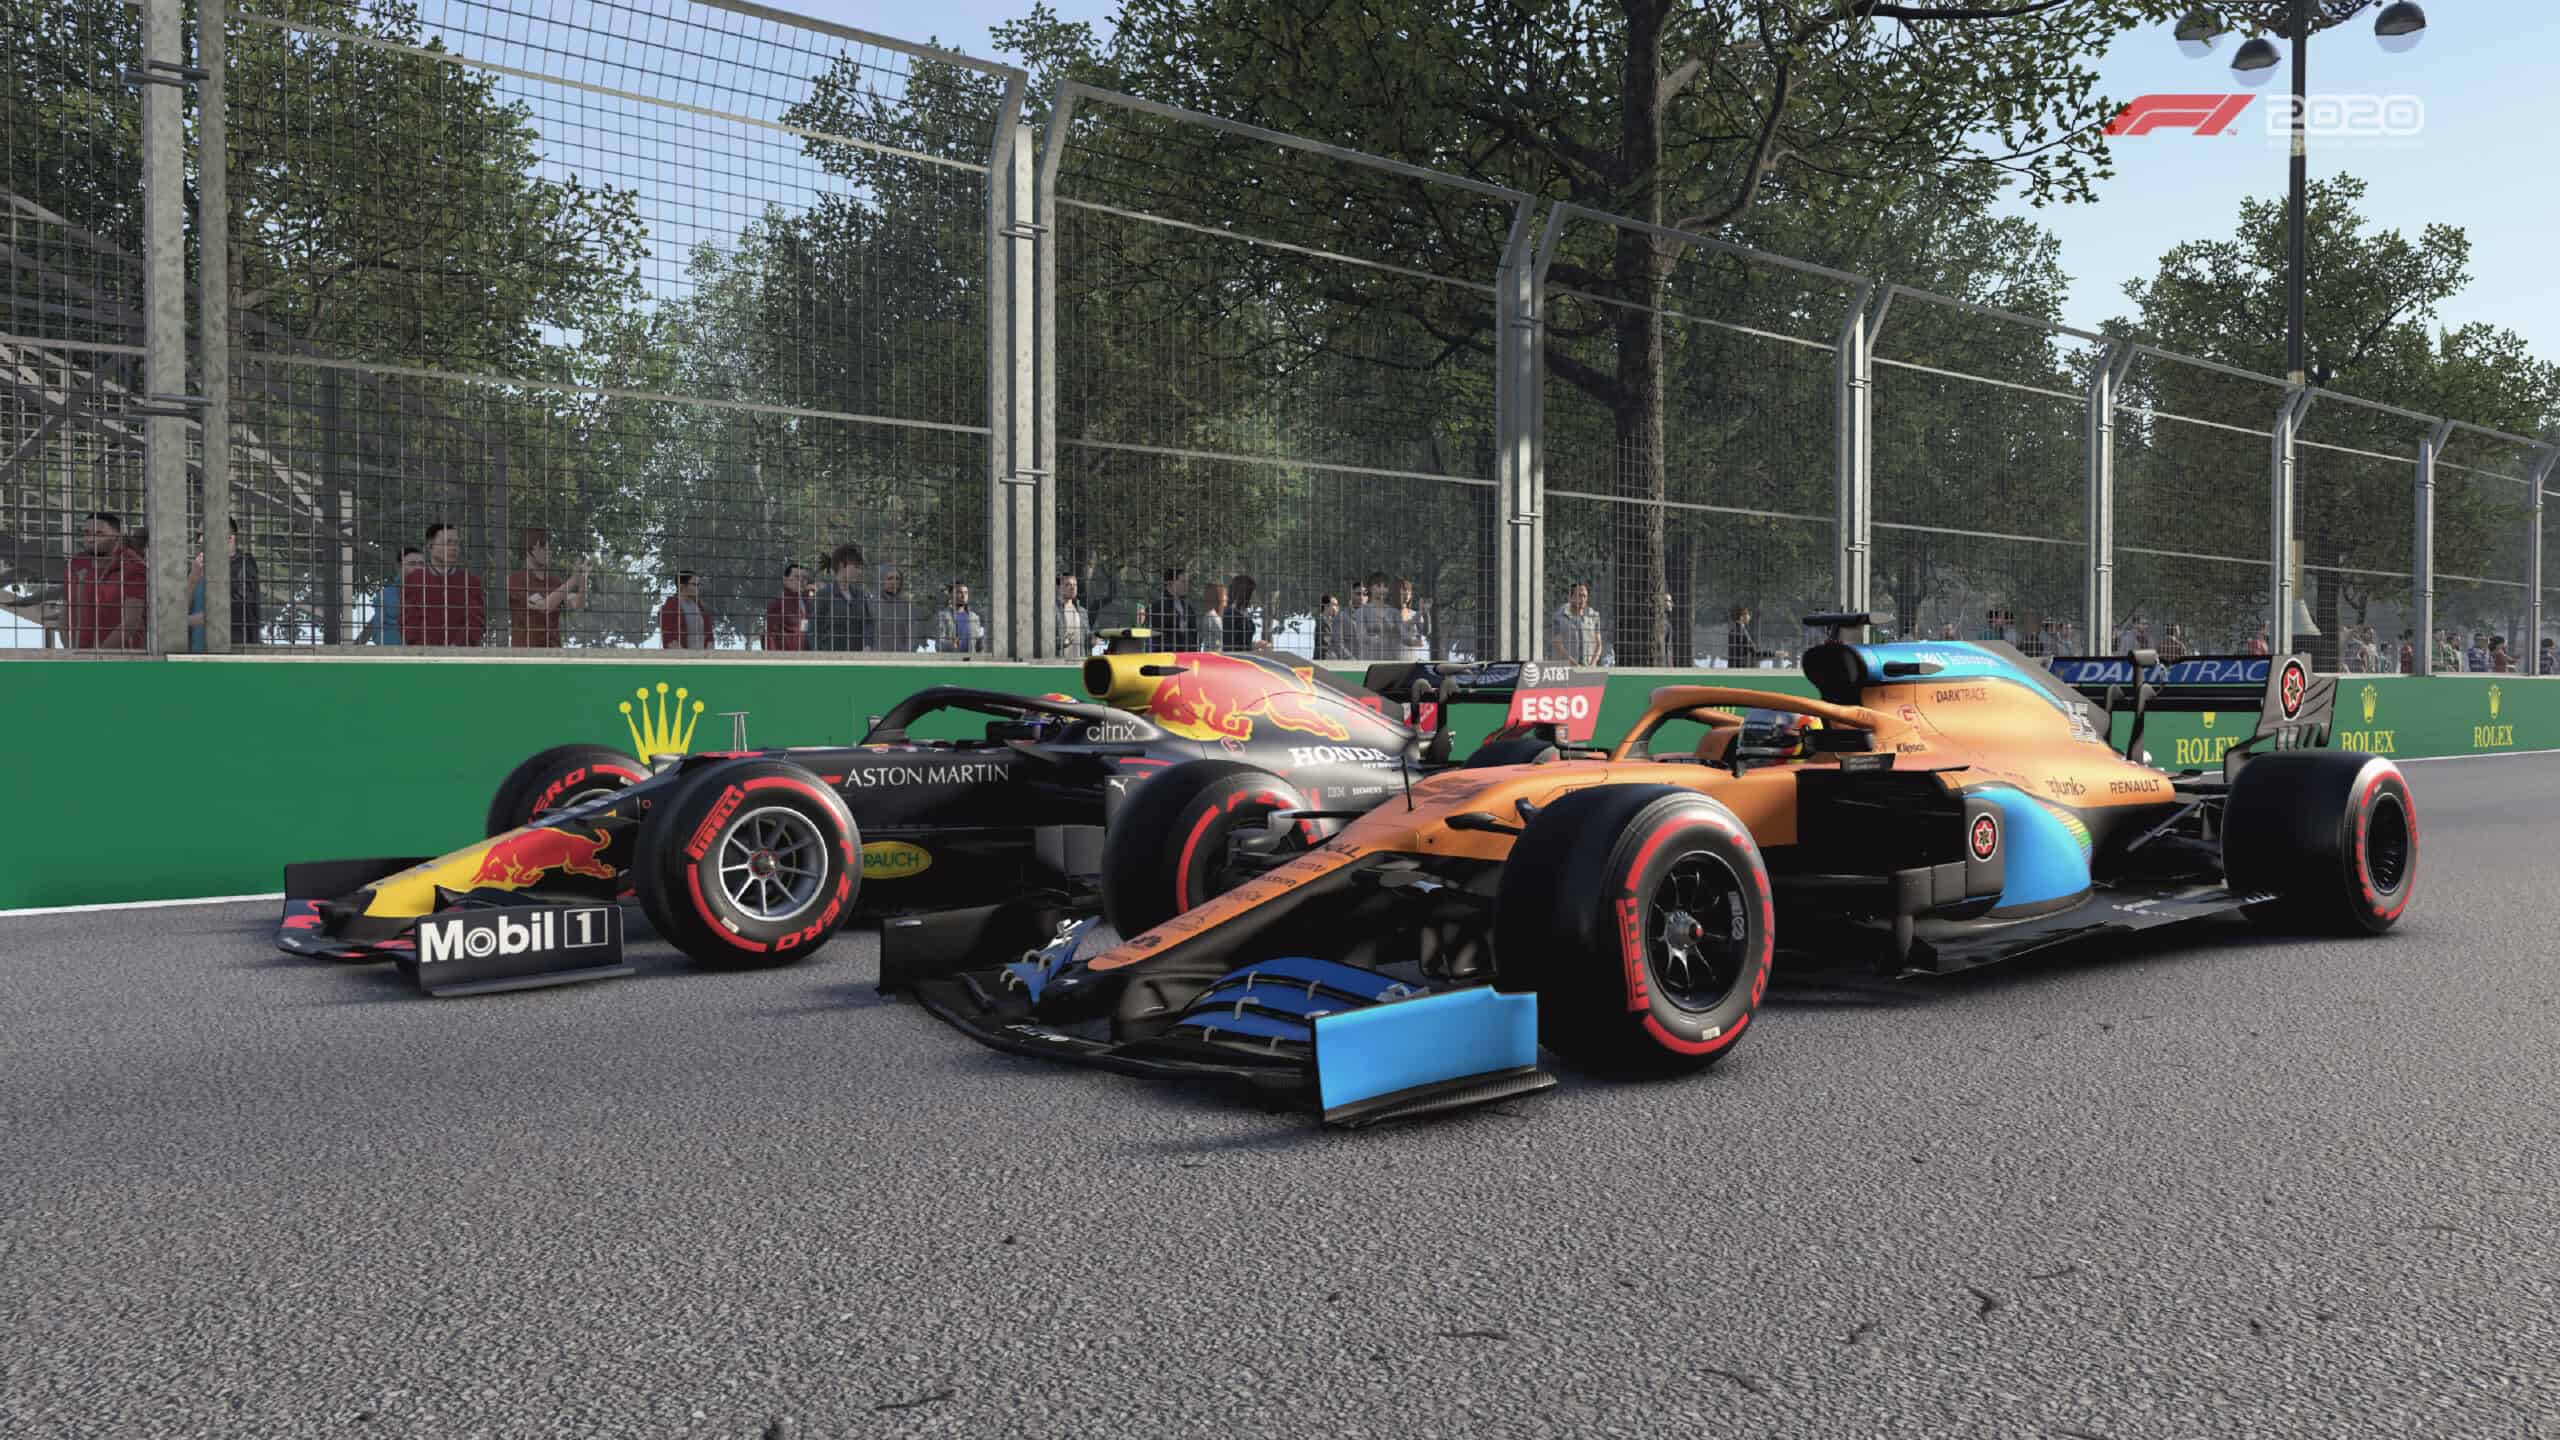 What we’d like to see in a new F1 game